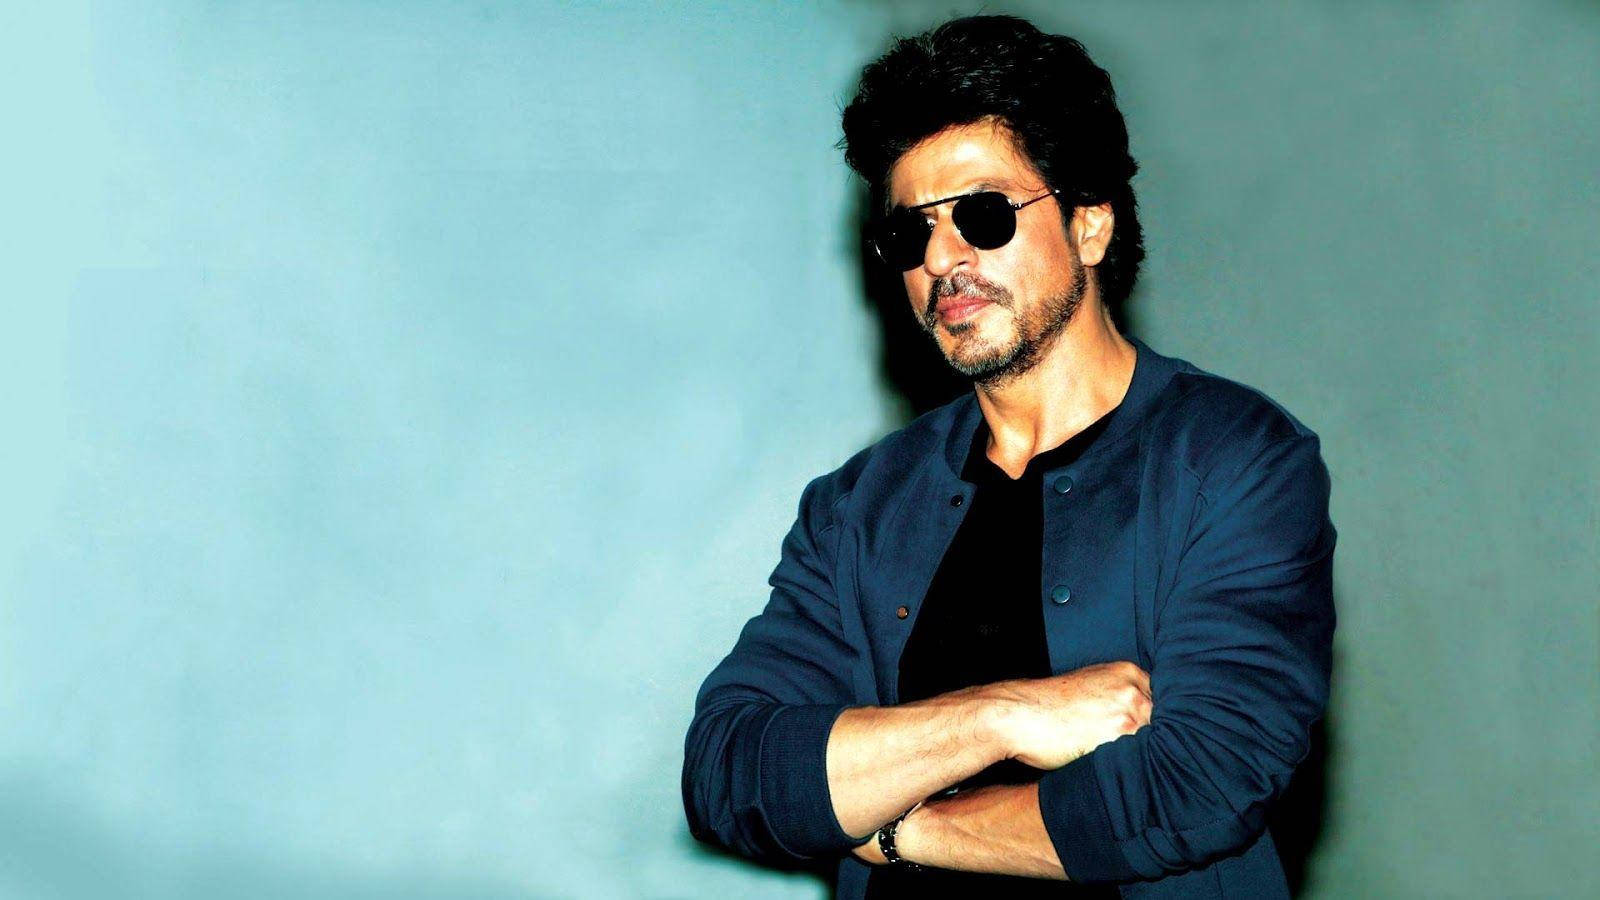 Shah Rukh Khan strikes his ICONIC pose at an event